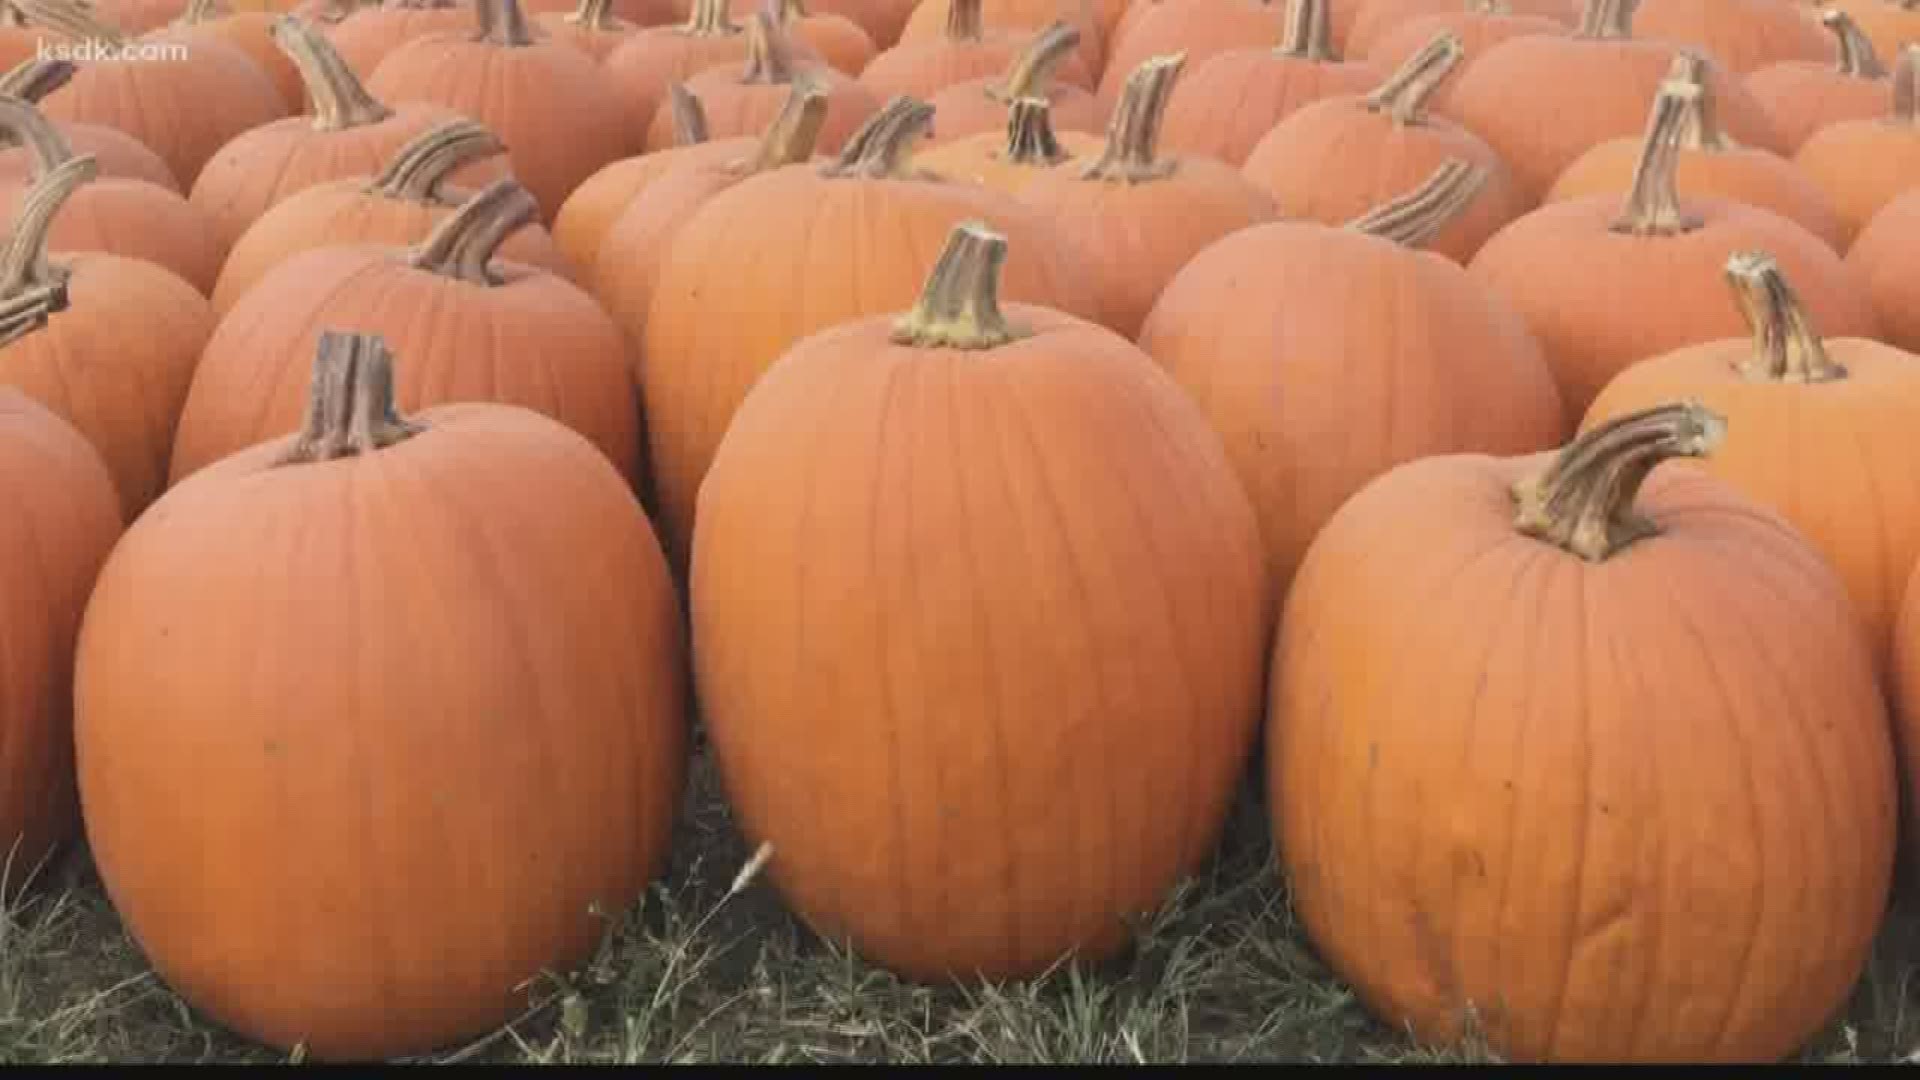 STL Motherhood Blogger, Denise Bertacchi, gave viewers a list of her favorite pumpkin patches in the St. Louis area.